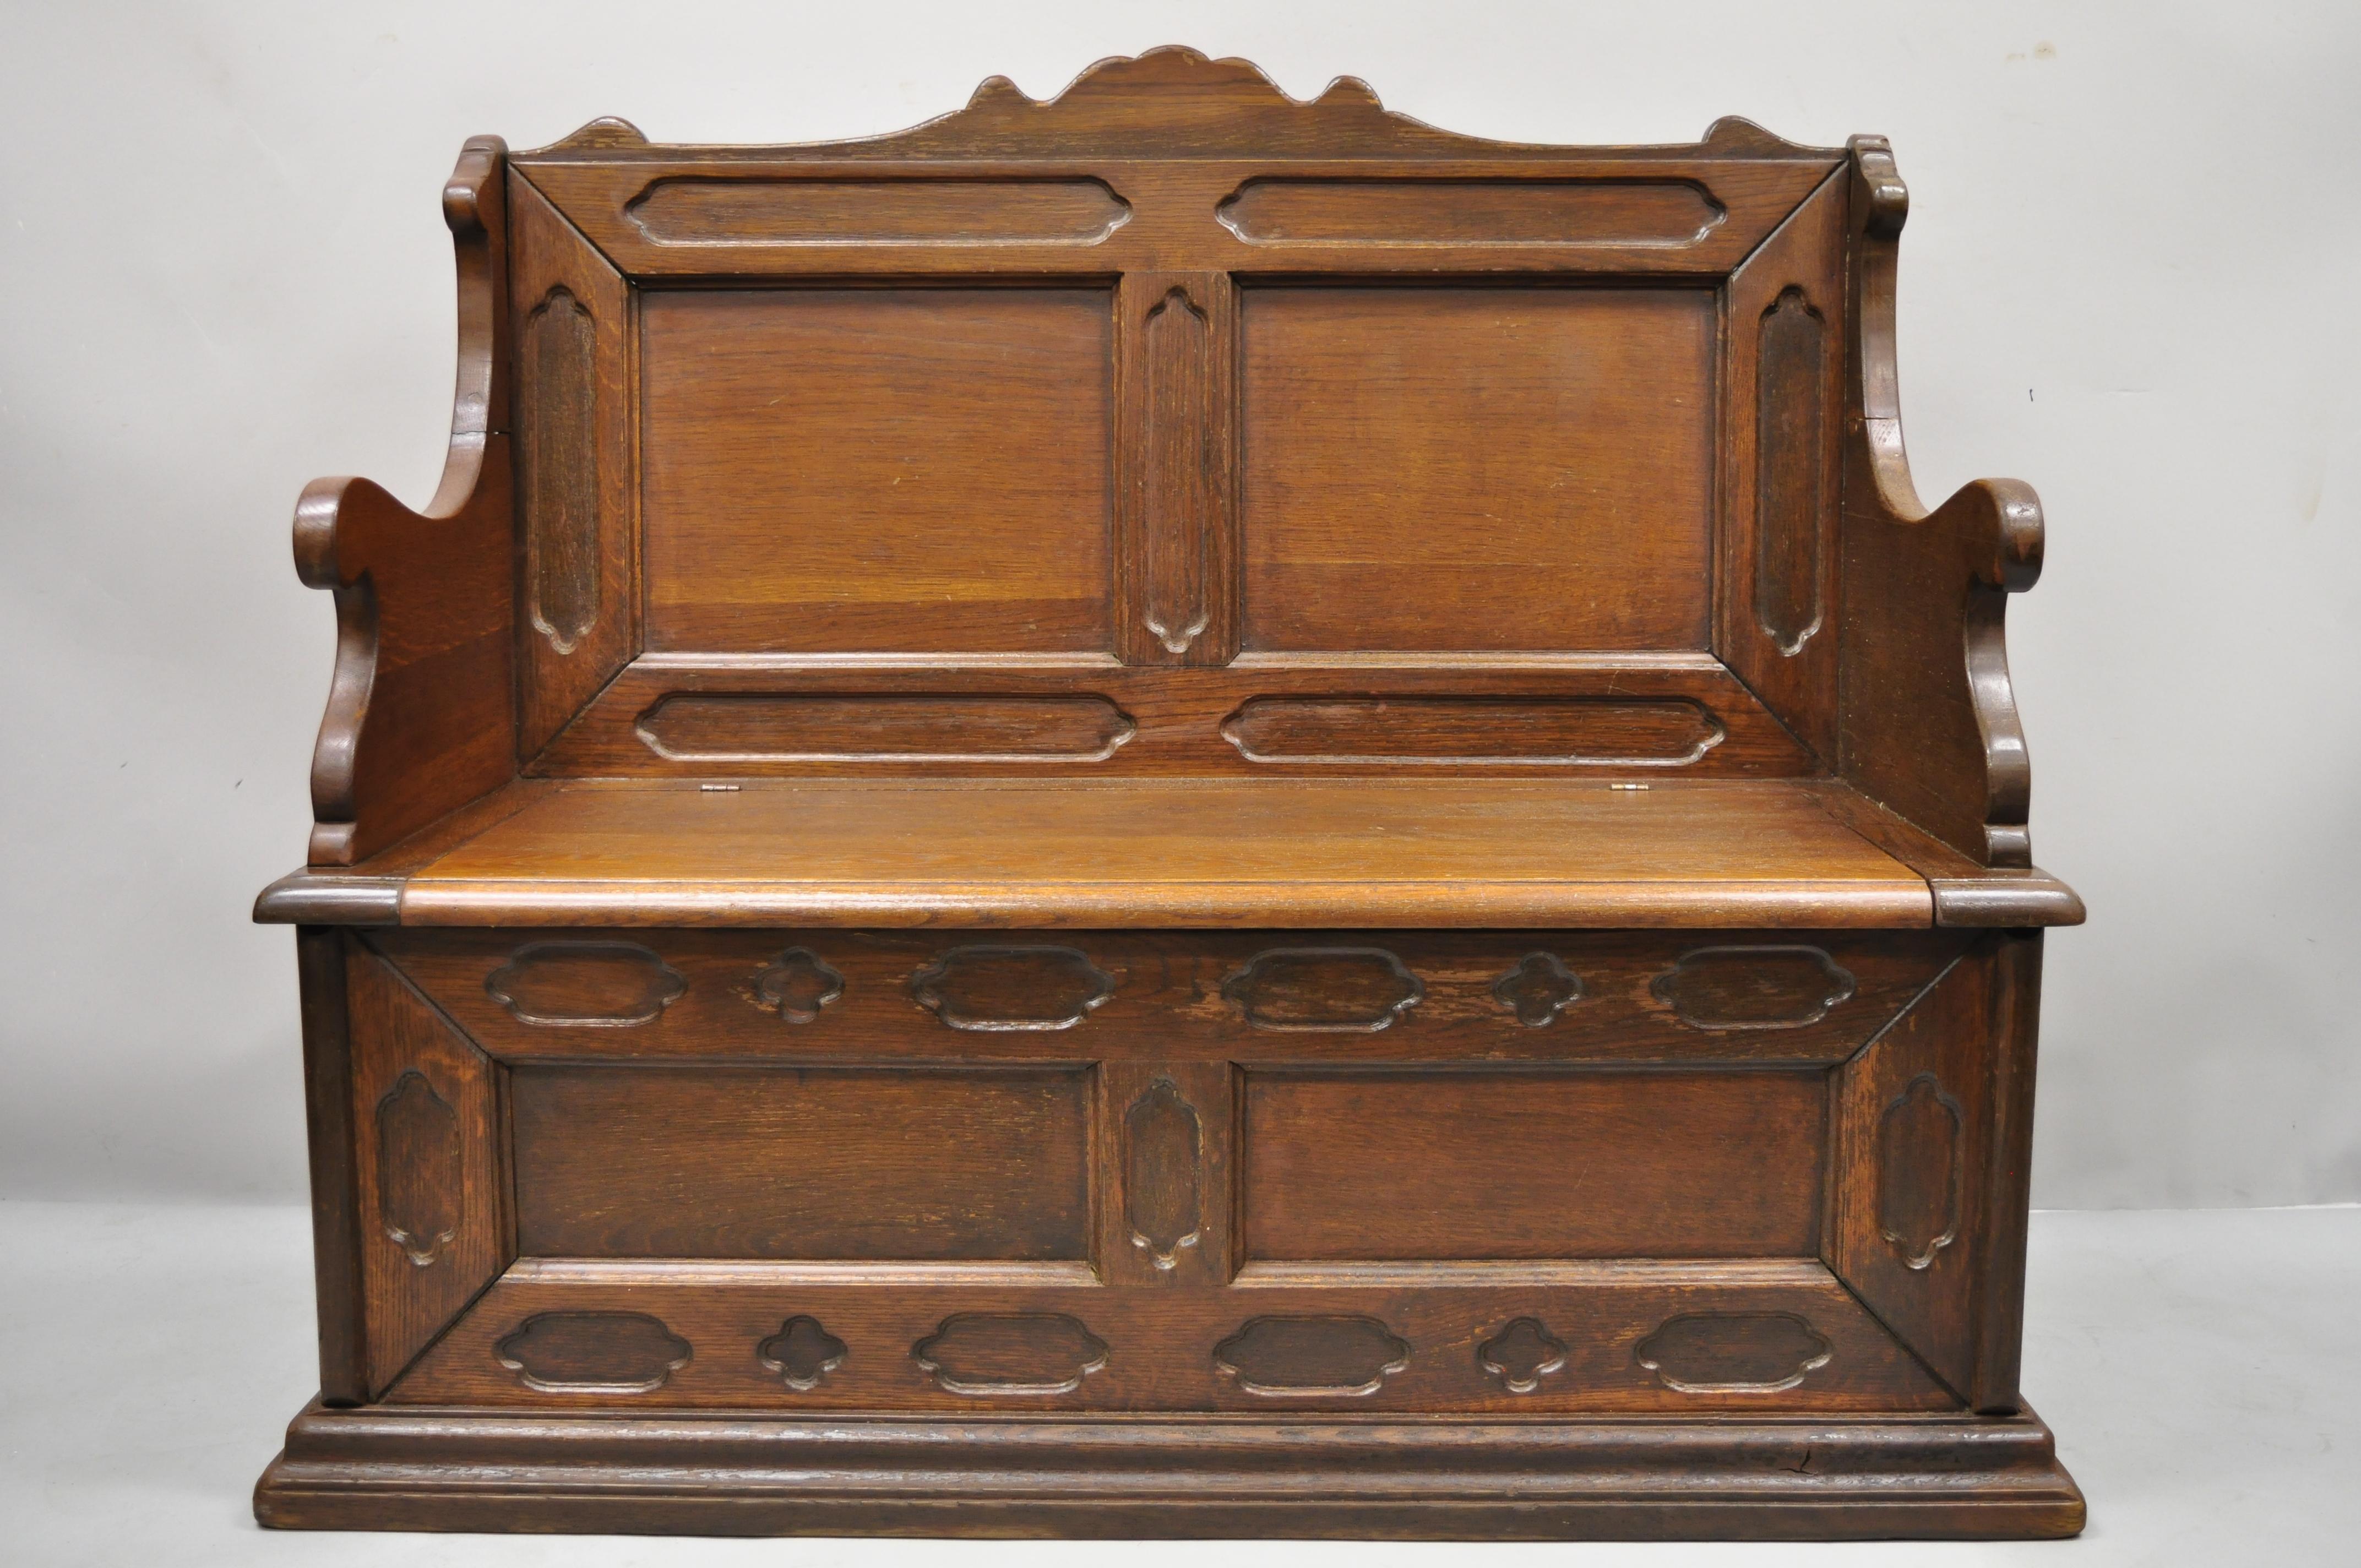 Antique English Jacobean Renaissance Revival oak wood pew bench with storage lid. Item features lift seat with storage, solid wood construction, beautiful wood grain, nicely carved details, very nice antique item, great style and form. Circa Early